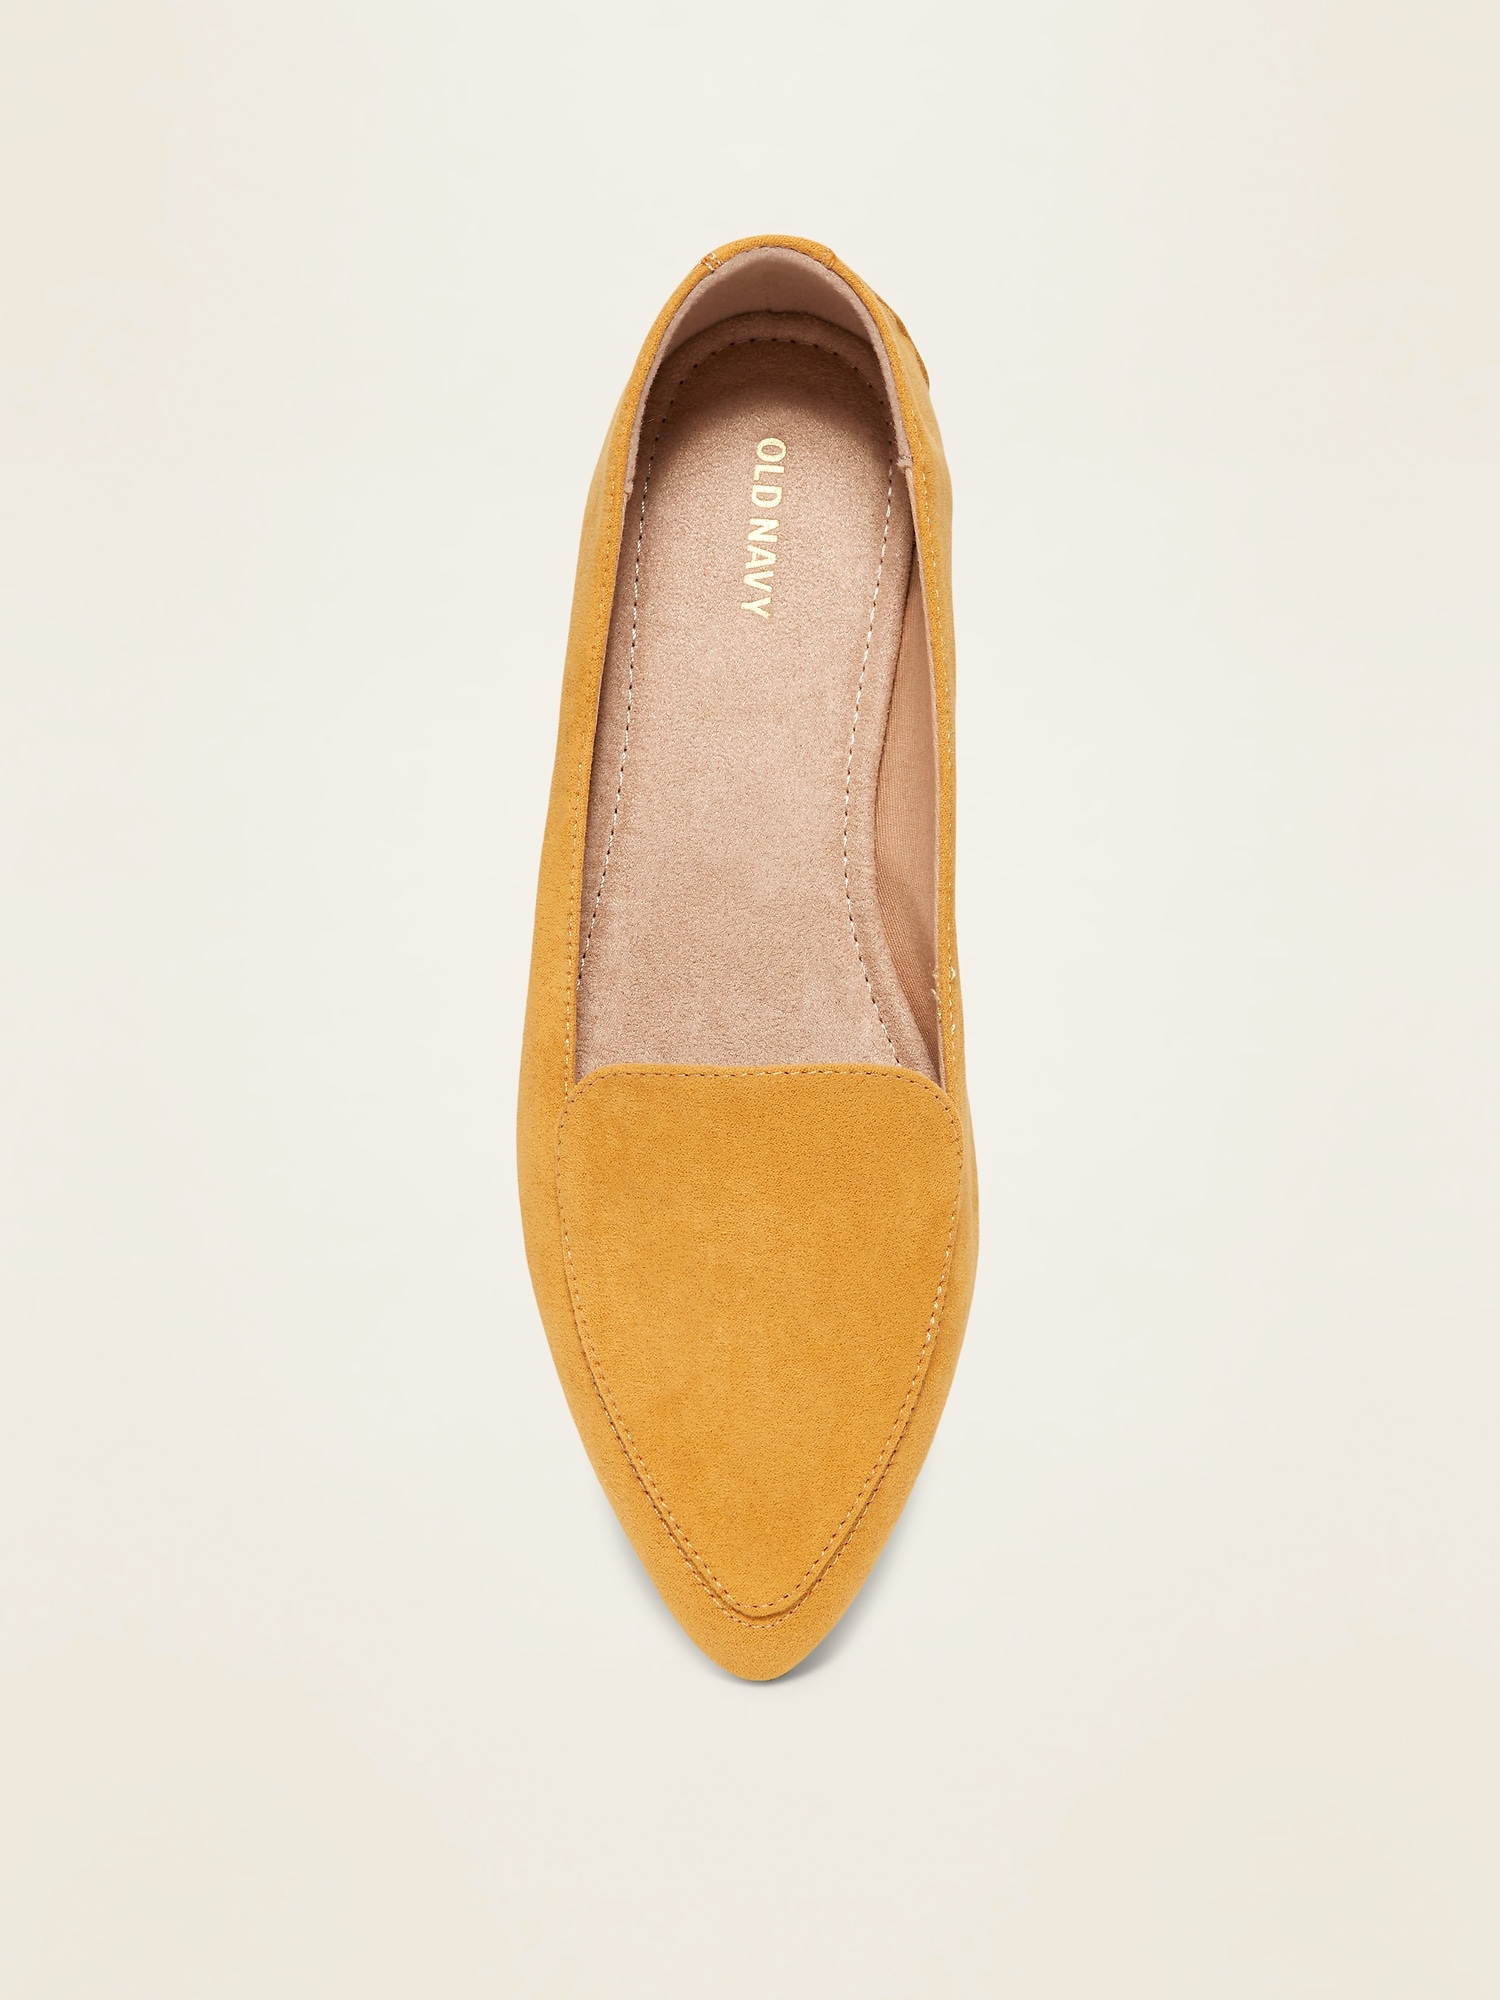 old navy loafers womens